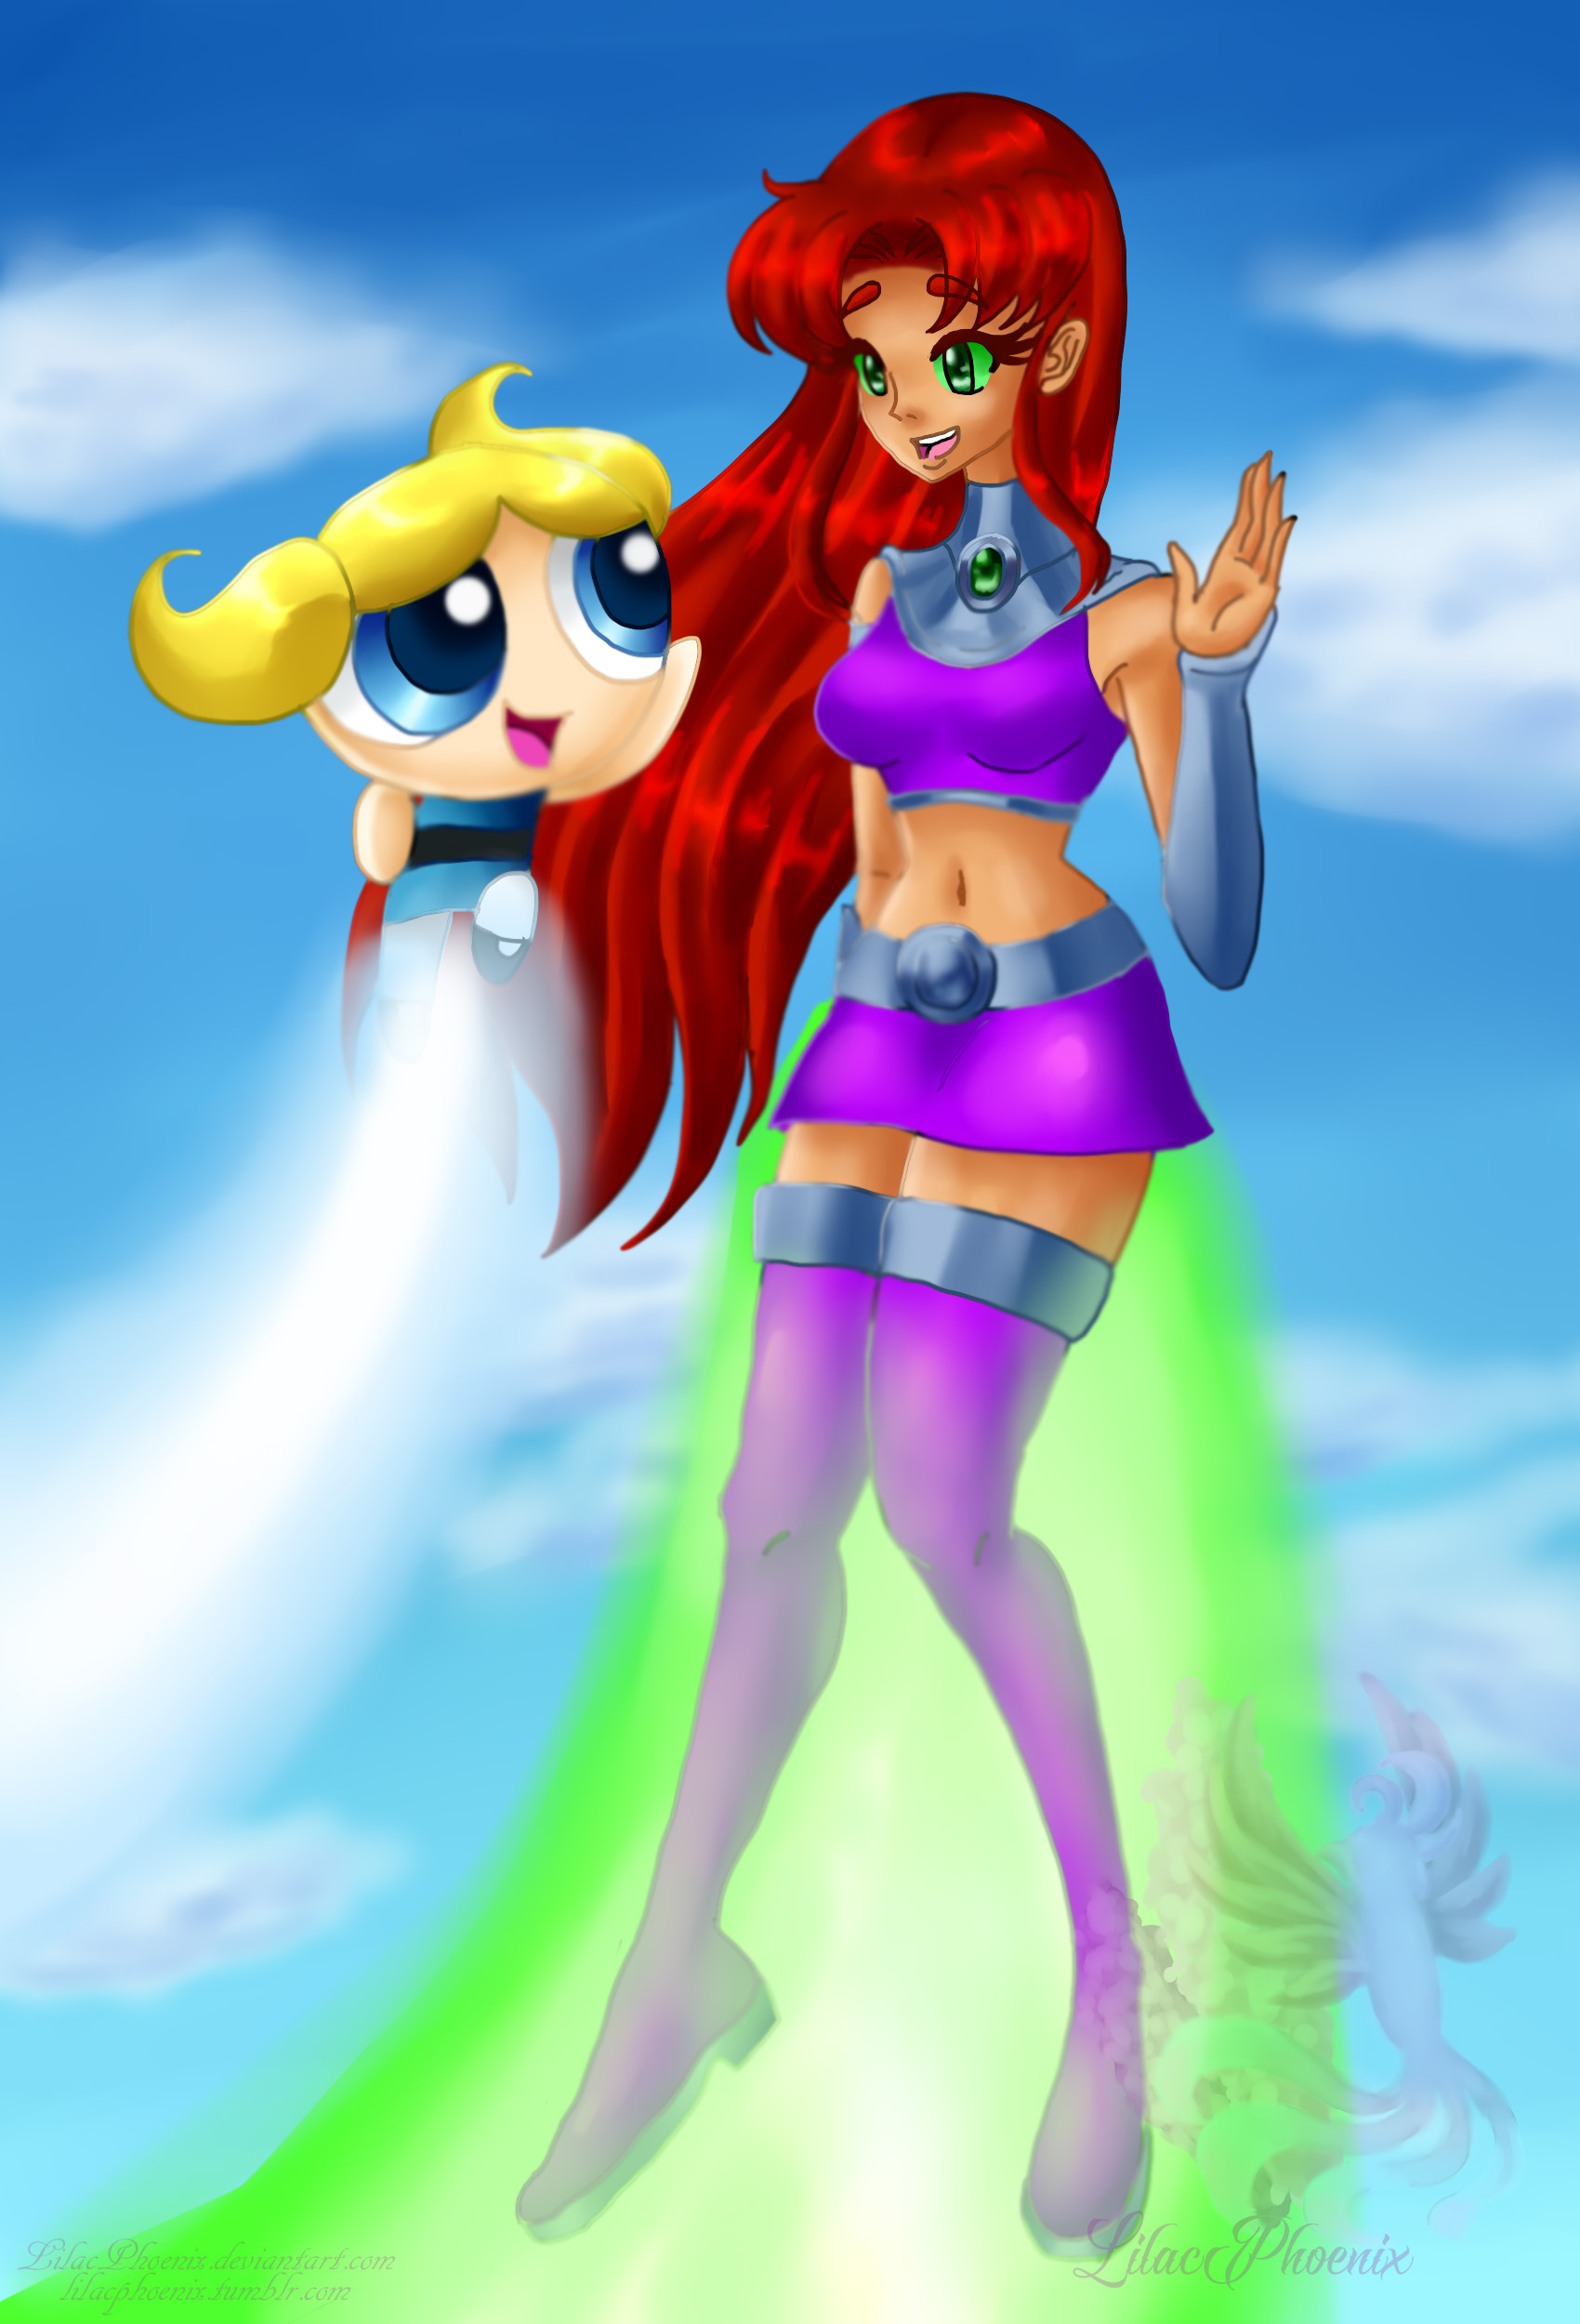 Bubbles and Starfire by LilacPhoenix